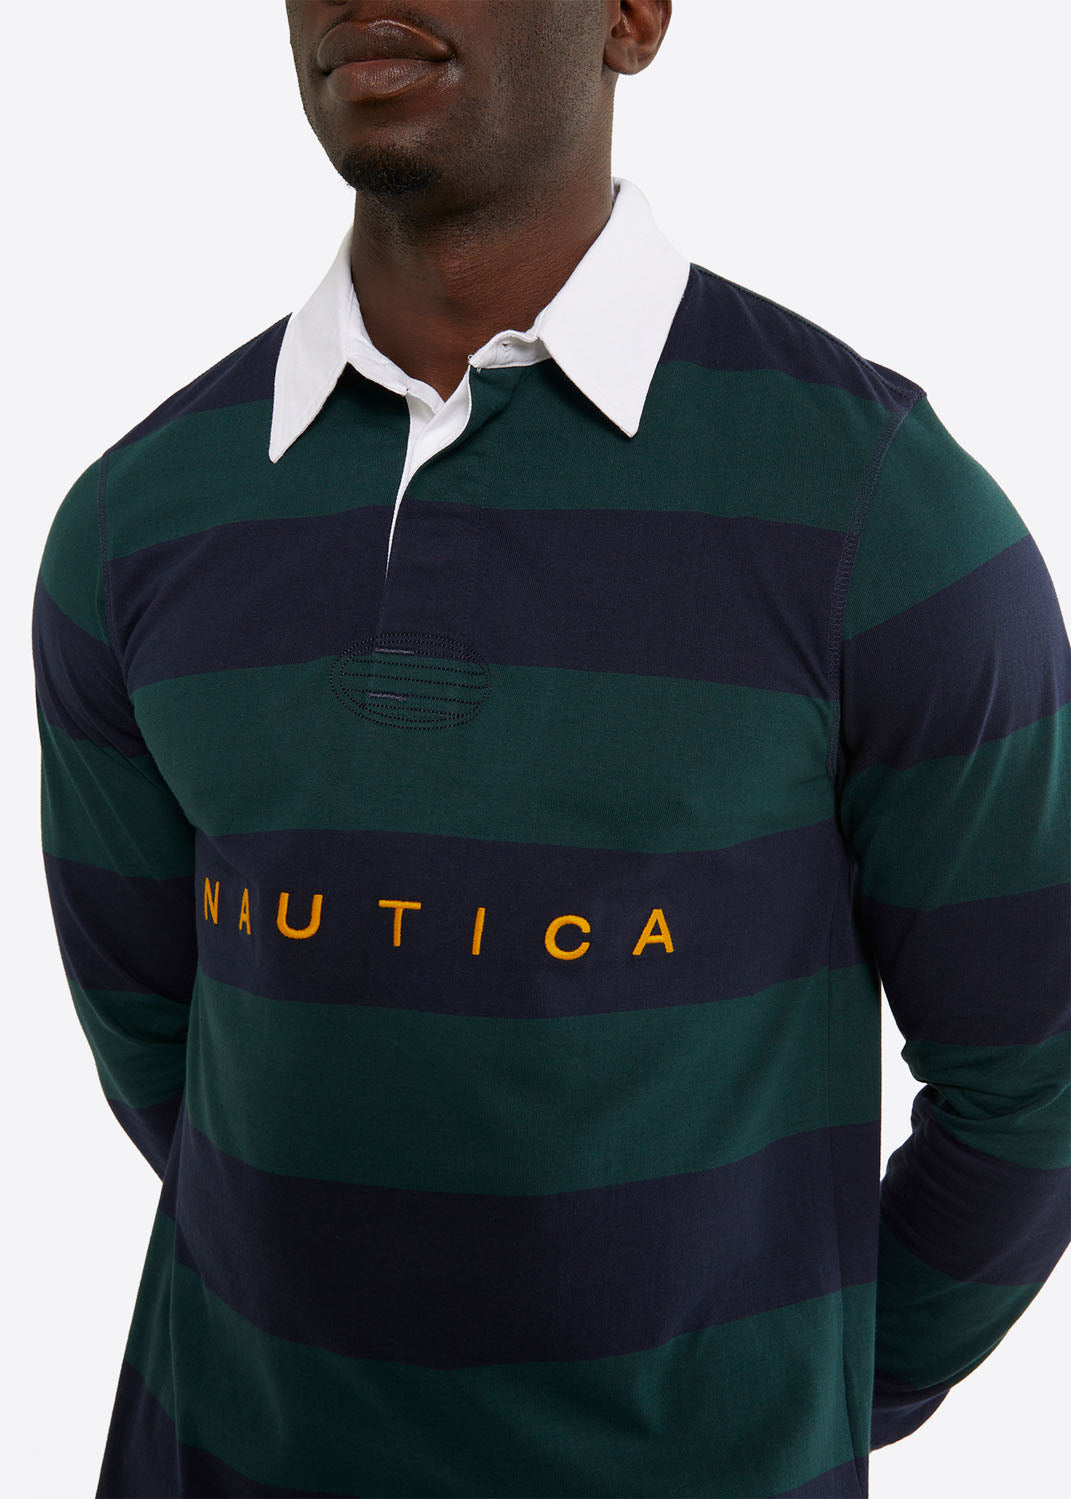 The Brute Rugby Shirt